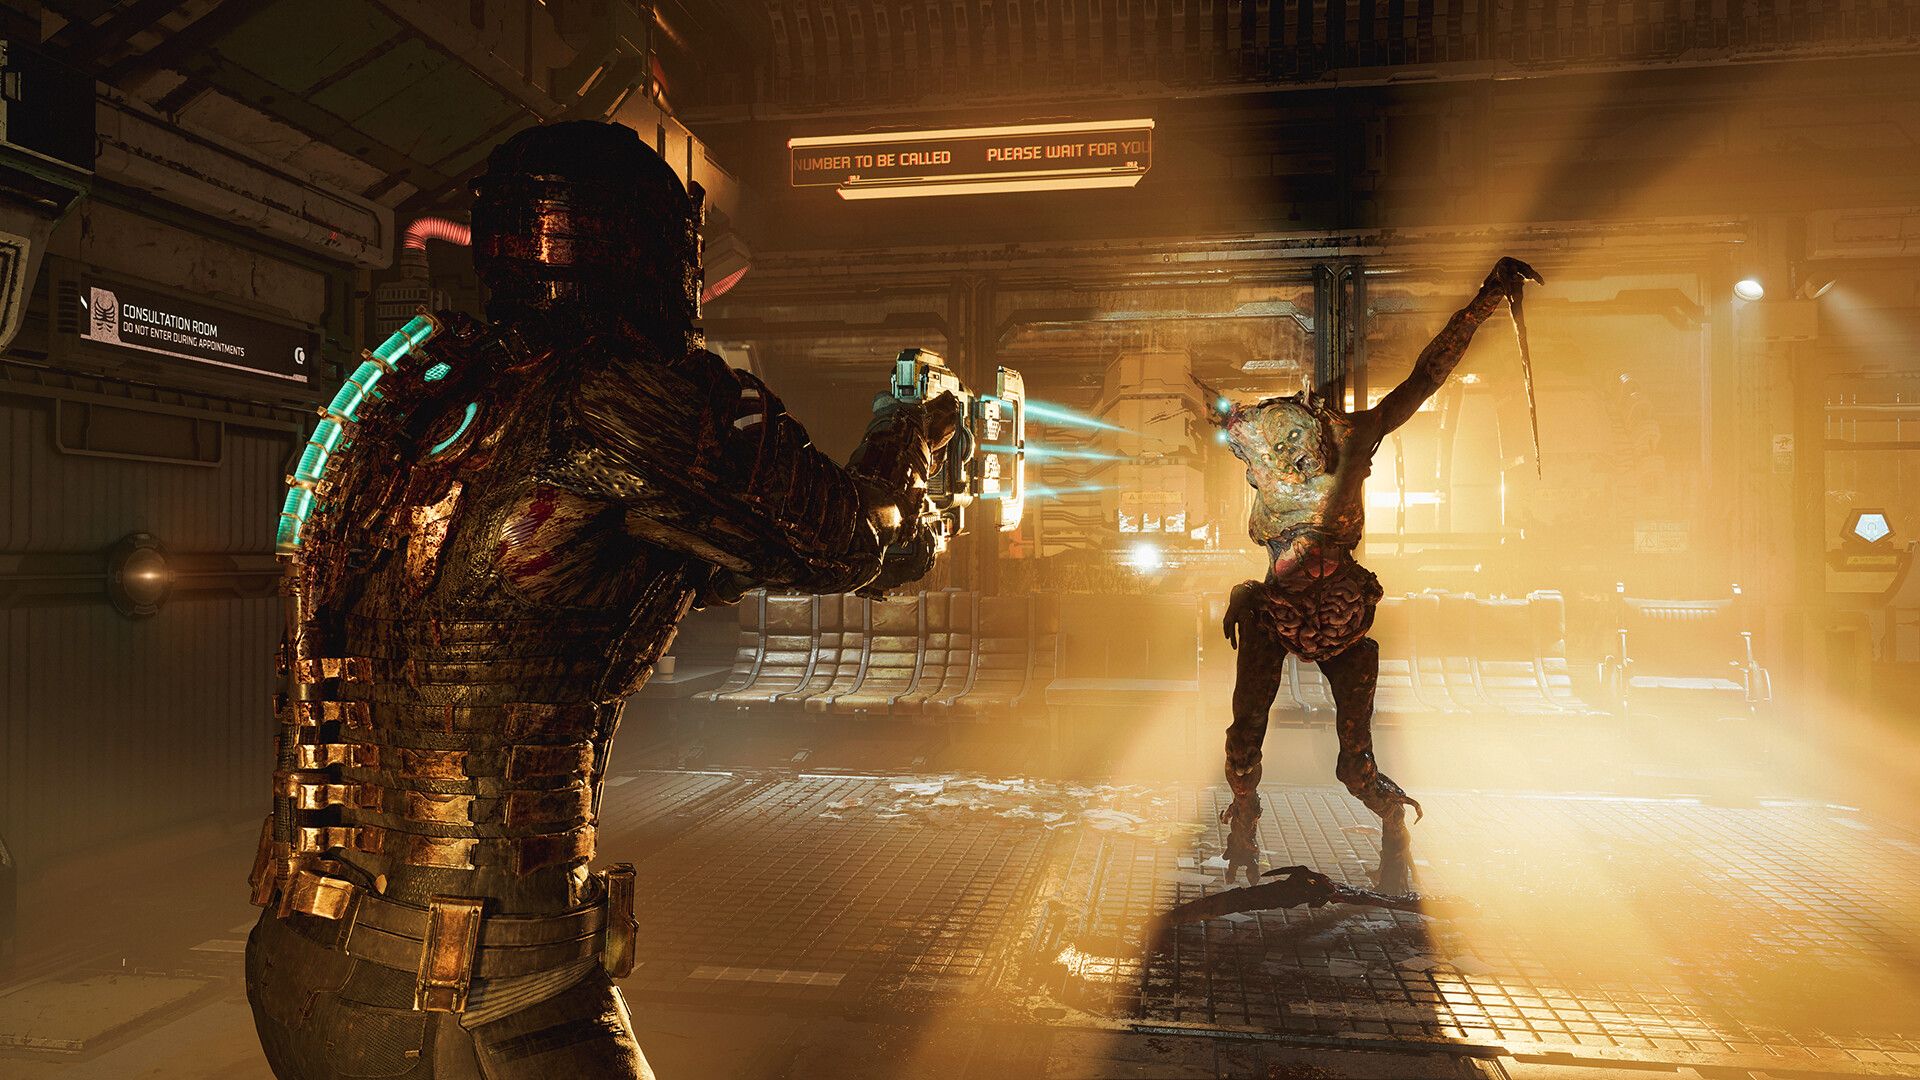 Video game screenshot of a person in sci-fi space armor aiming a three-pronged laser gun at a lanky monster